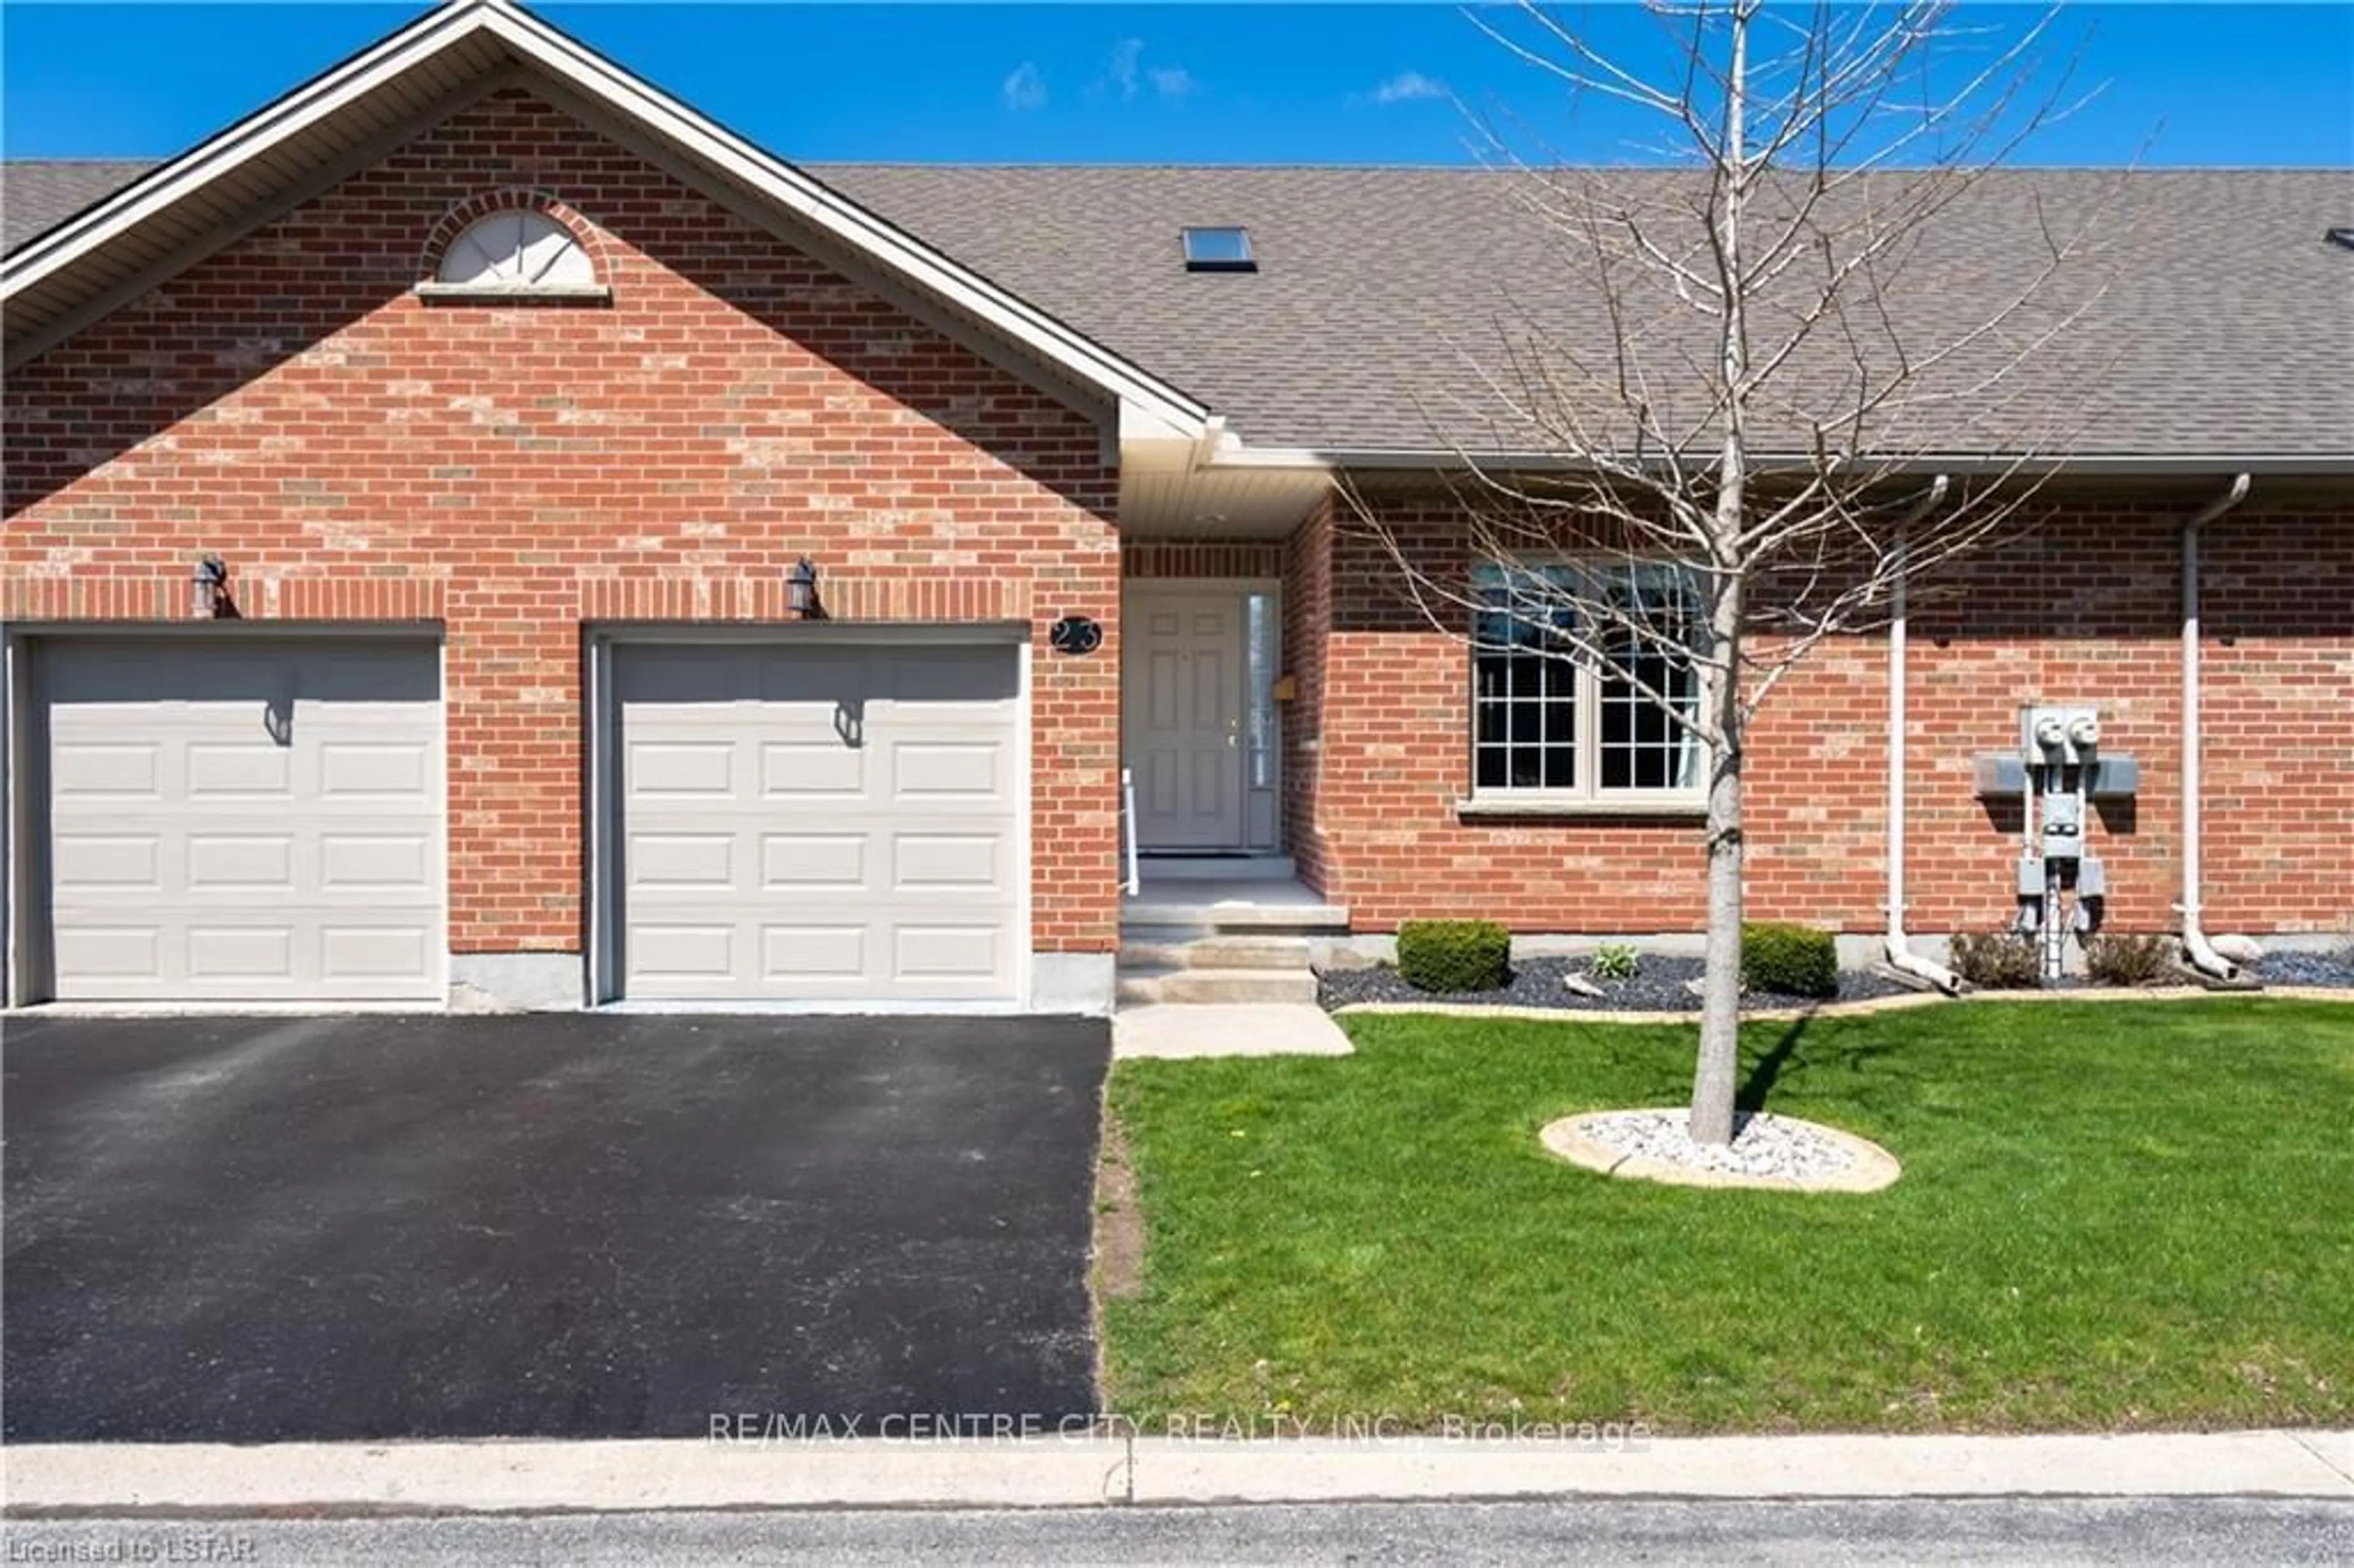 Home with brick exterior material for 307 Metcalfe St #23, Strathroy-Caradoc Ontario N7G 1R1